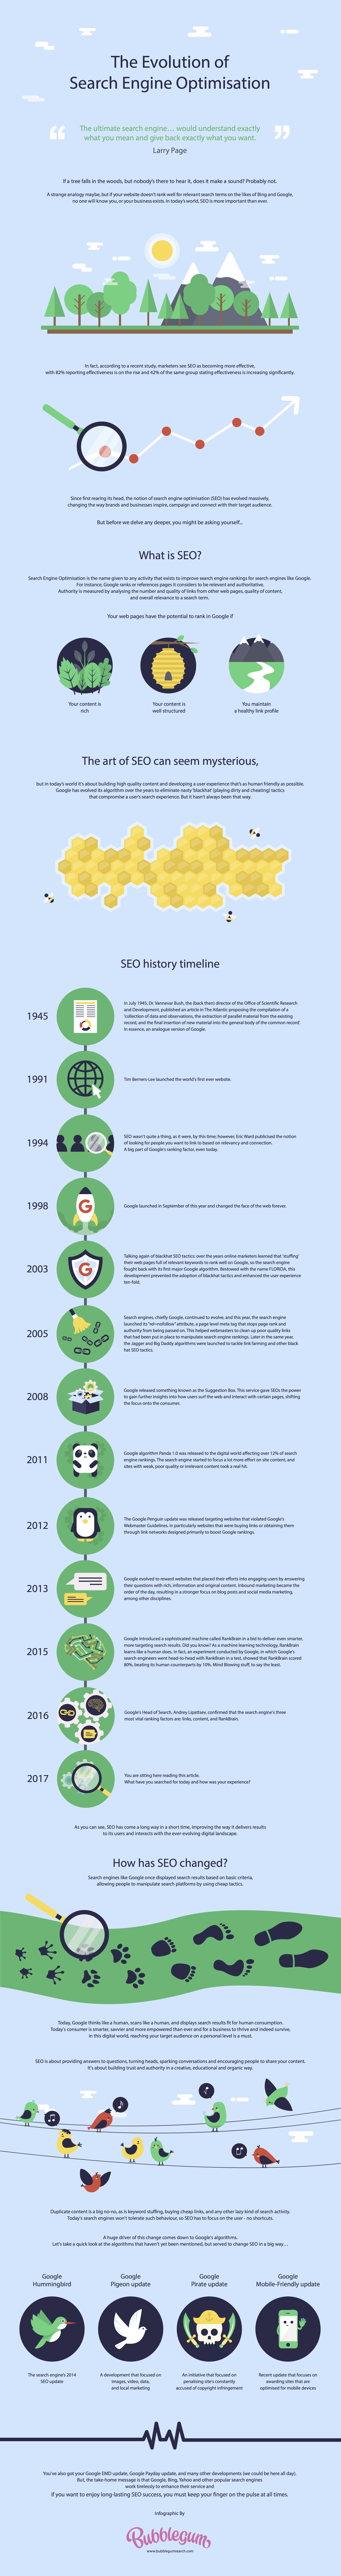 Evolution_of_SEO-Infographic.png